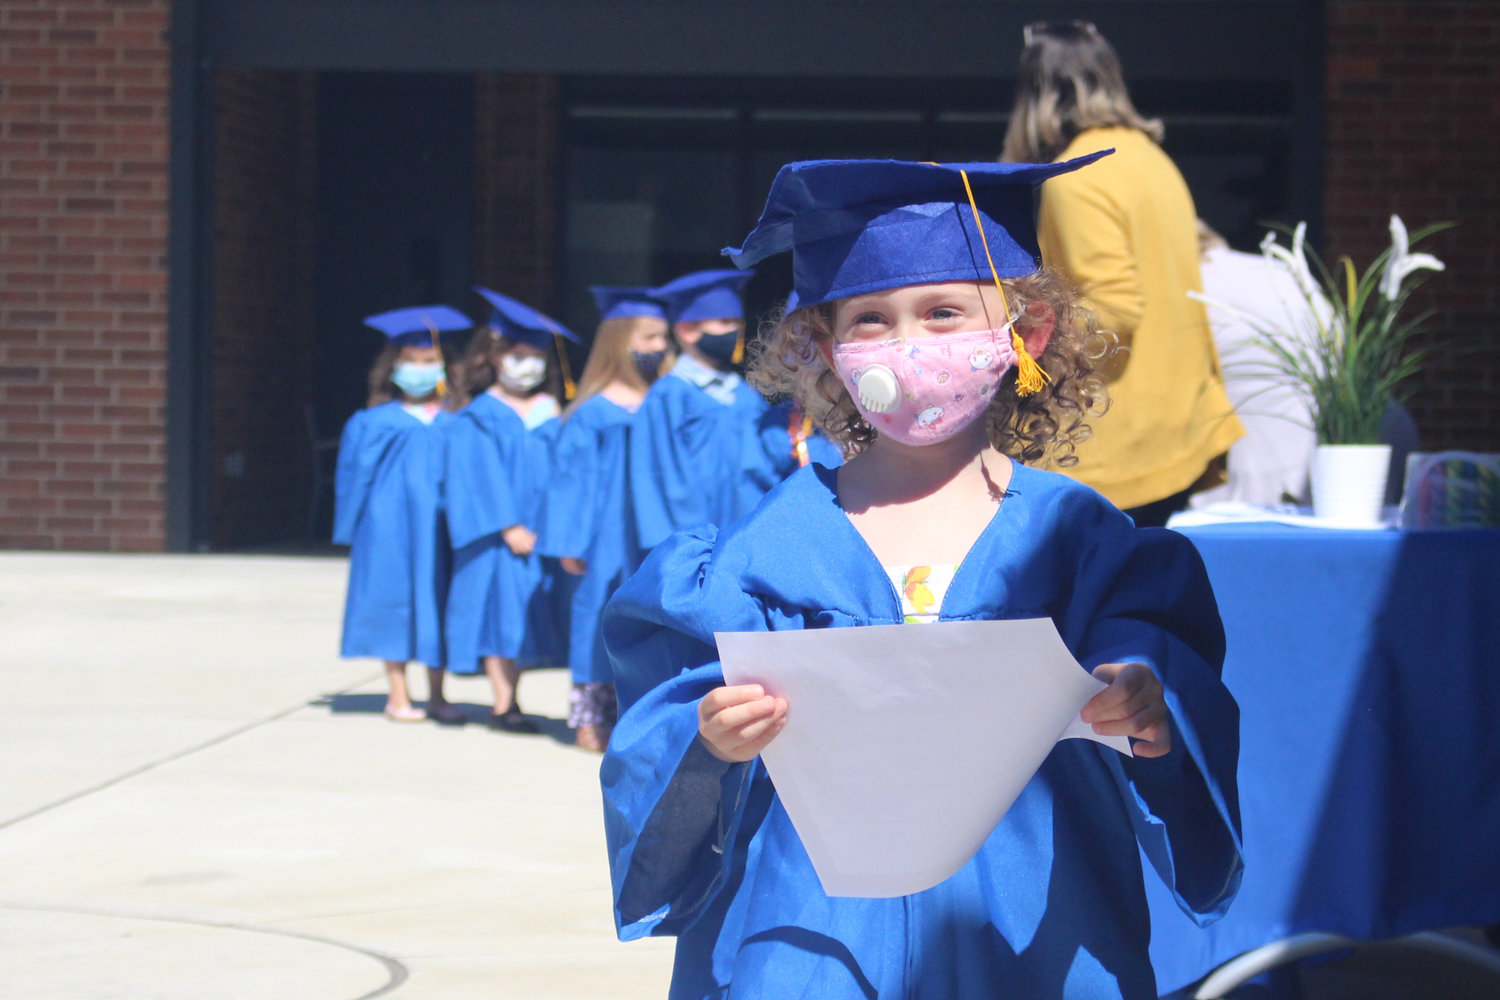 Preschooler Kyli Petrie is pictured graduating from Ridgefield’s Early Learning Center.